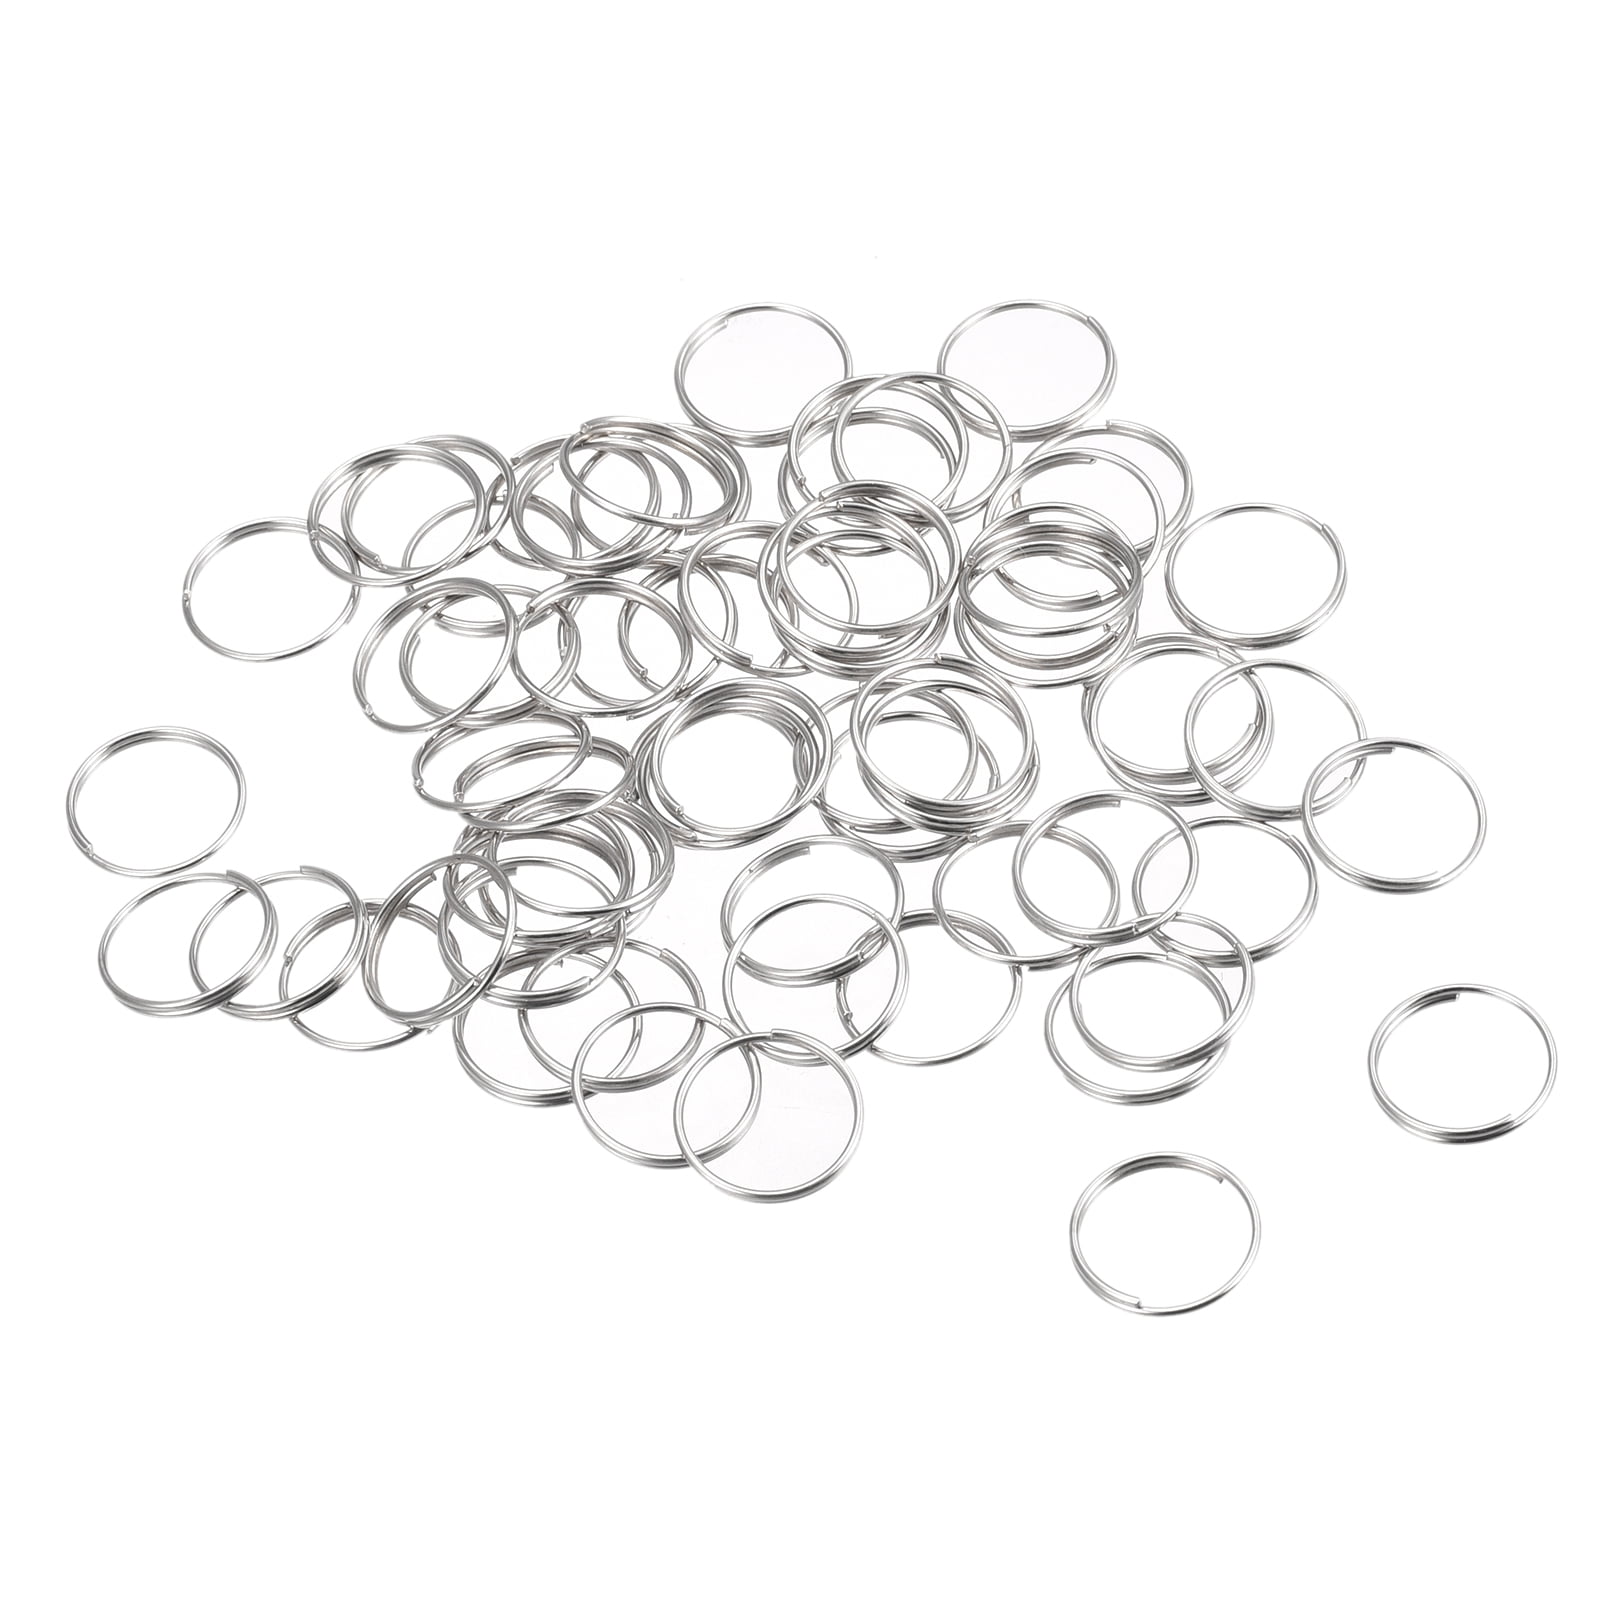 Double Loops Split Rings, 8mm Small Round Key Ring Parts for DIY Crafts  Making, Silver Tone 48Pcs